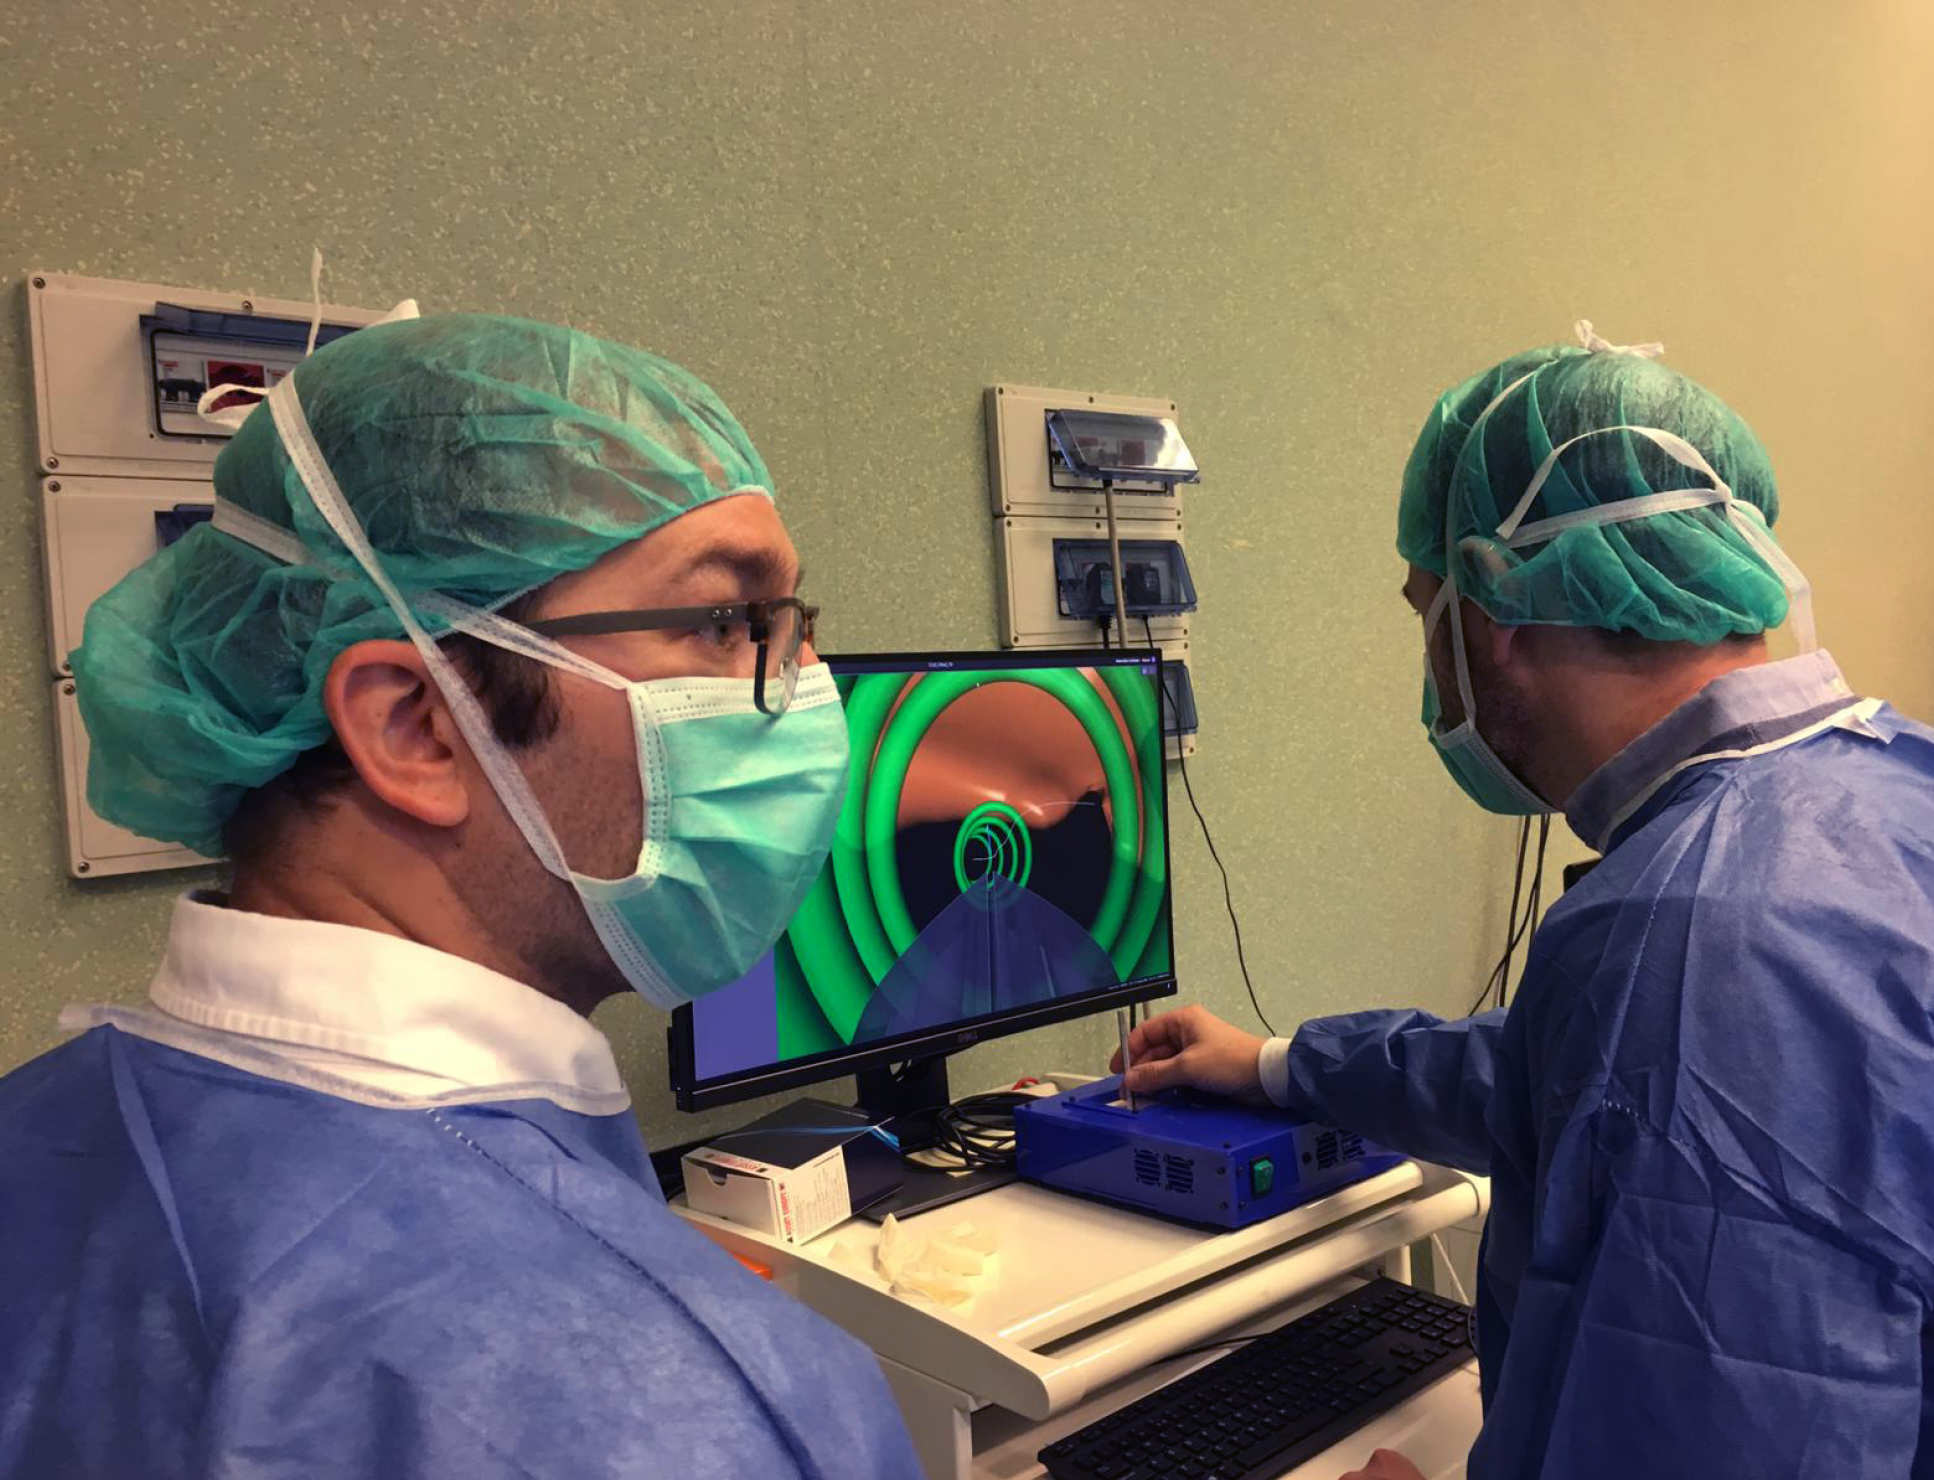 Dr Riva and Dr Secoli oversee the intraoperative interface of the catheter